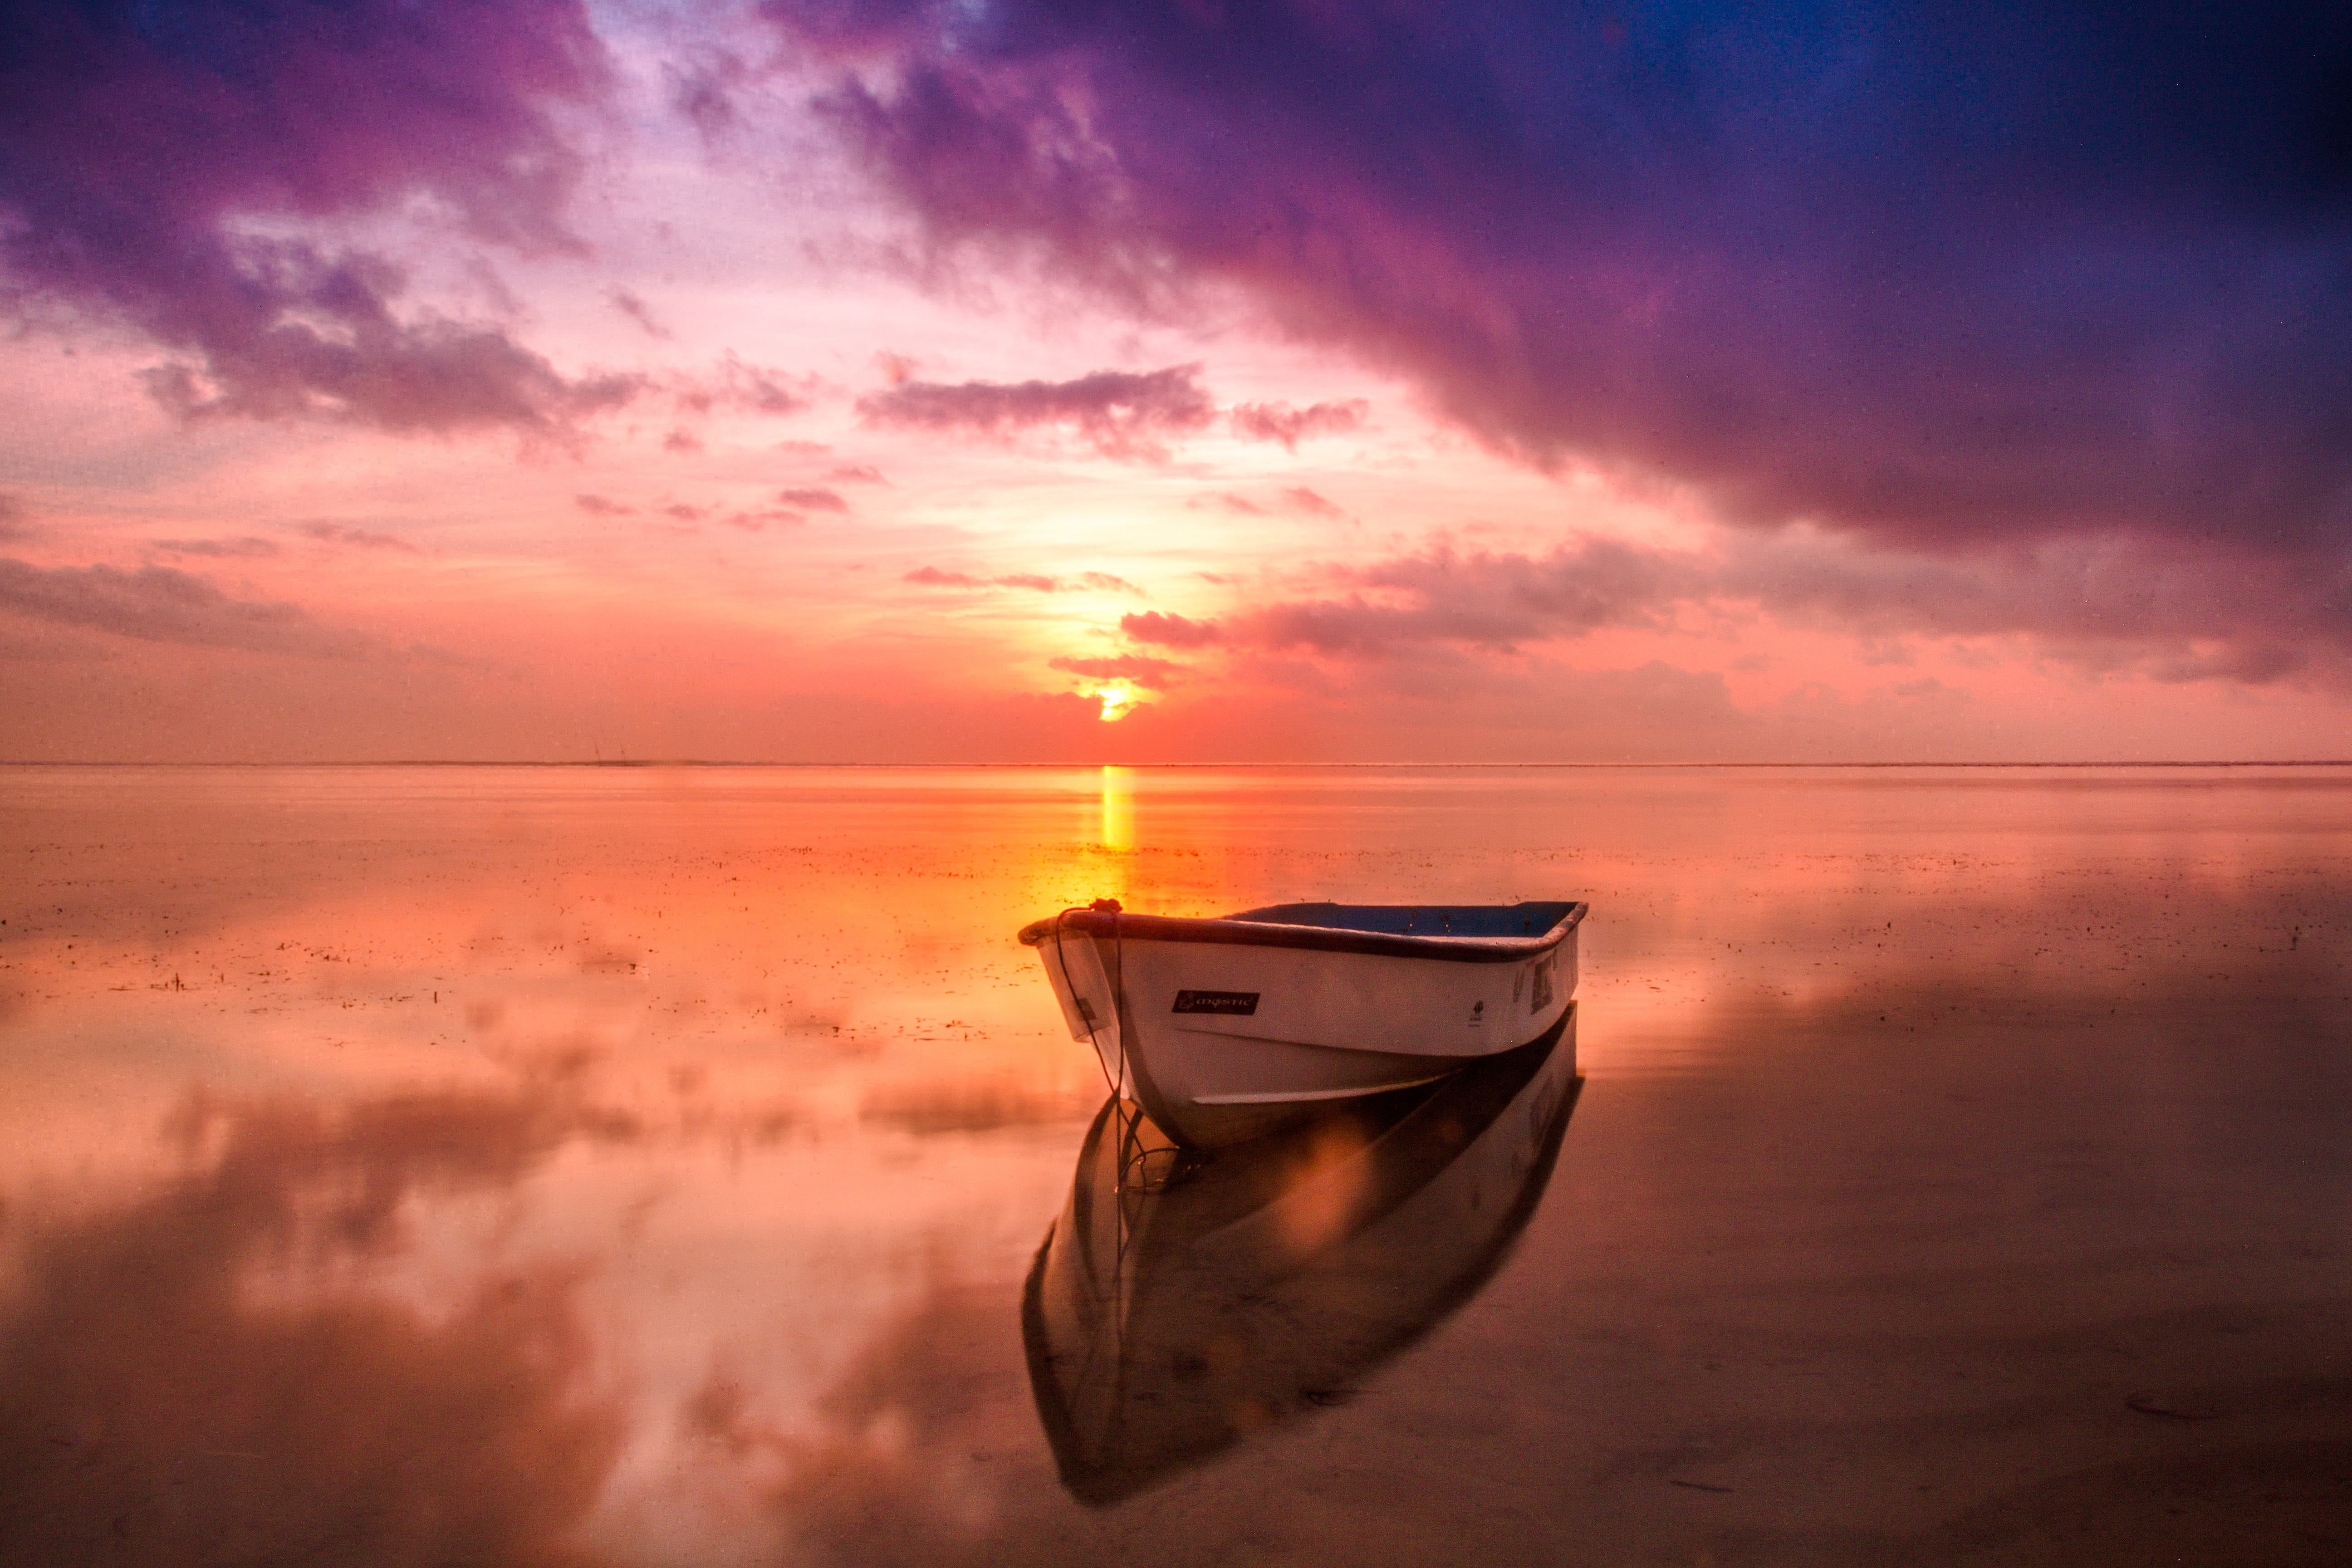 Picalls.com | Lonely boat at sunset by Nuno Obey.